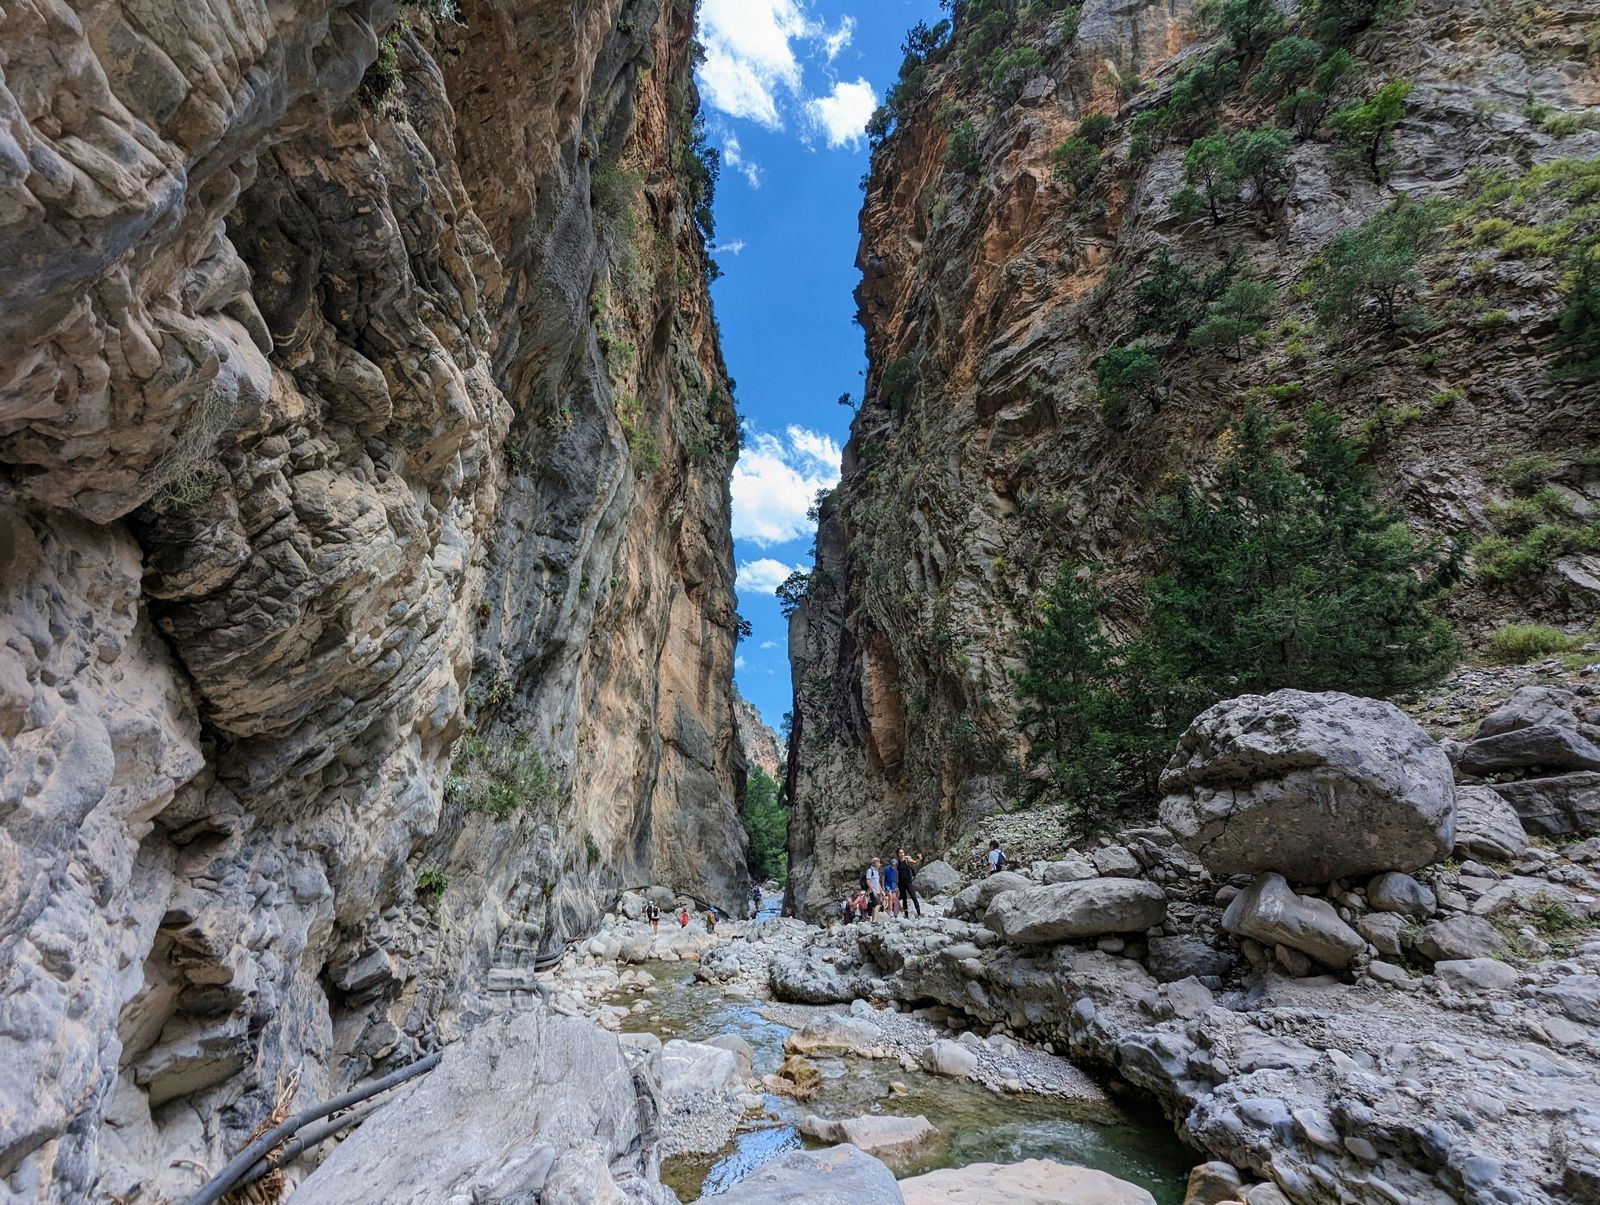 The Samaria Gorge Hike: Getting There by Public Transport and Other Essential Tips